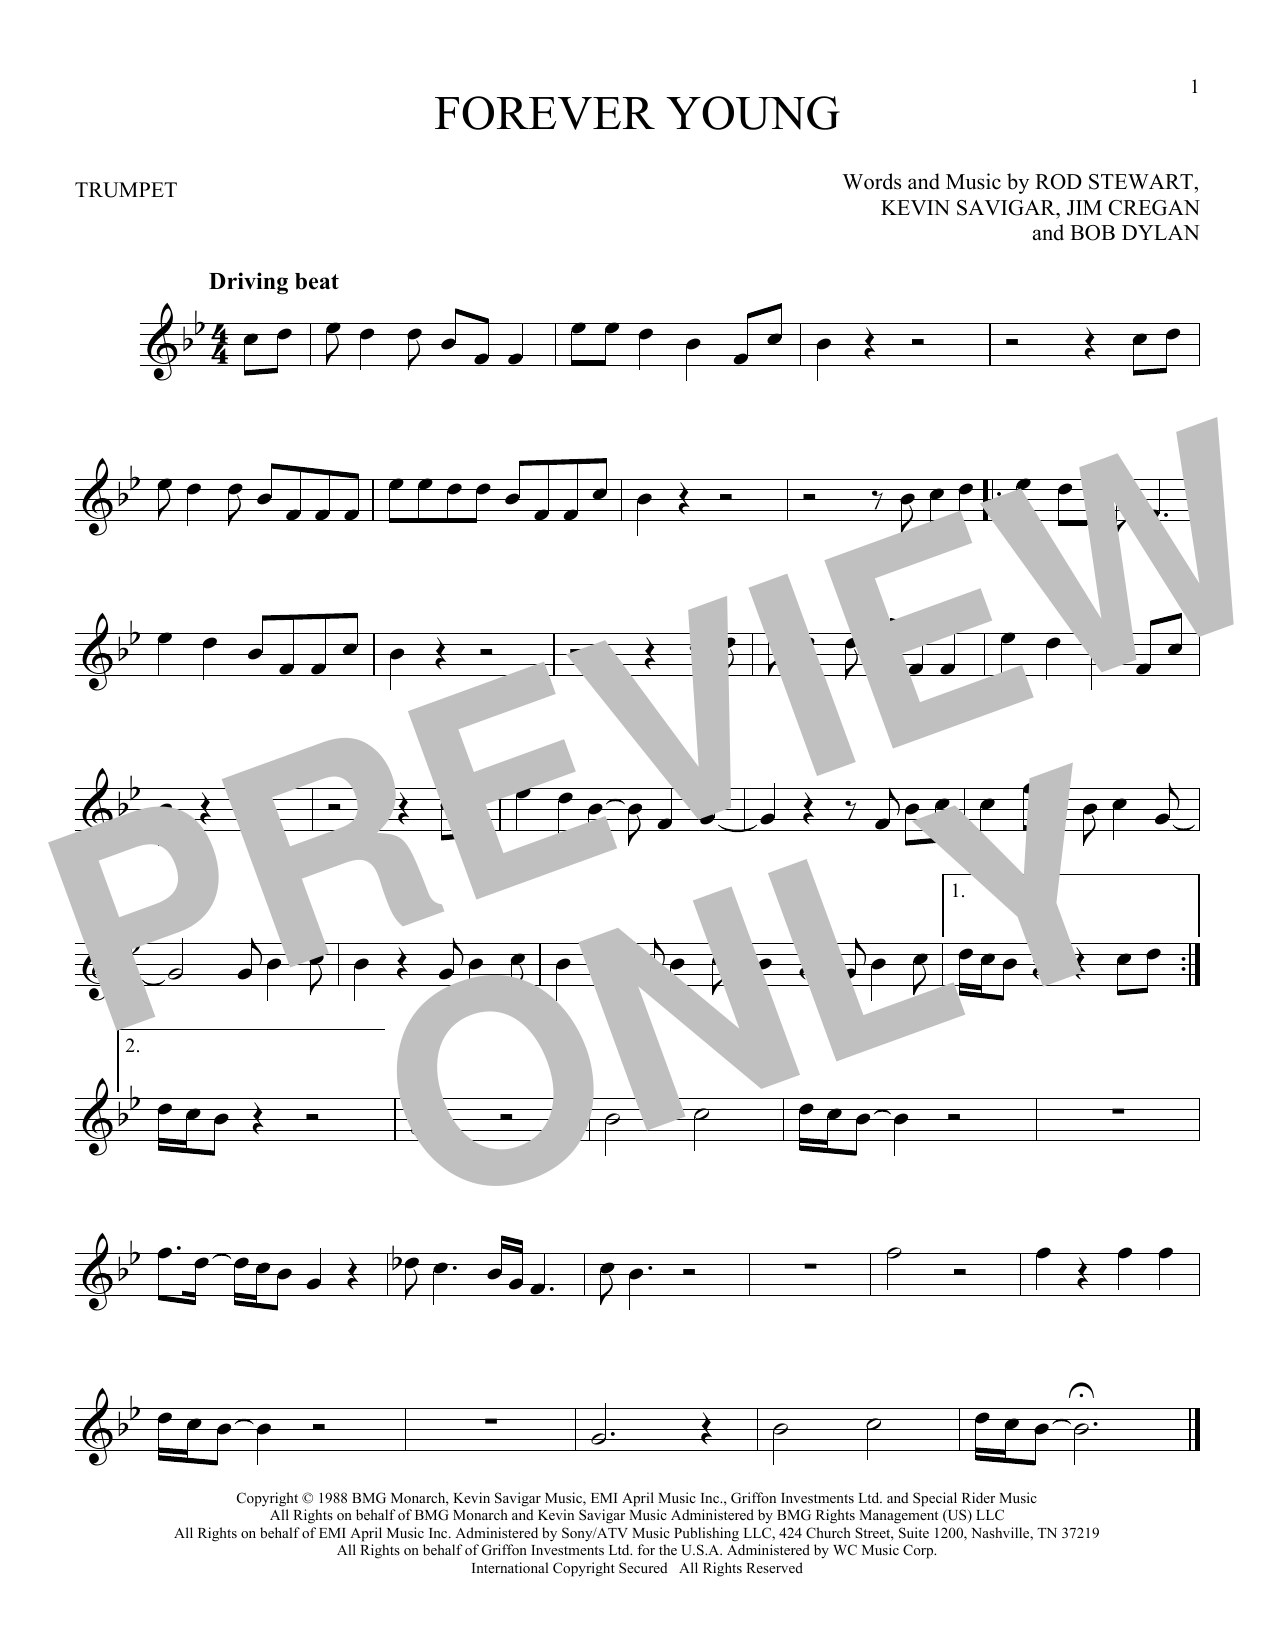 Download Rod Stewart Forever Young Sheet Music